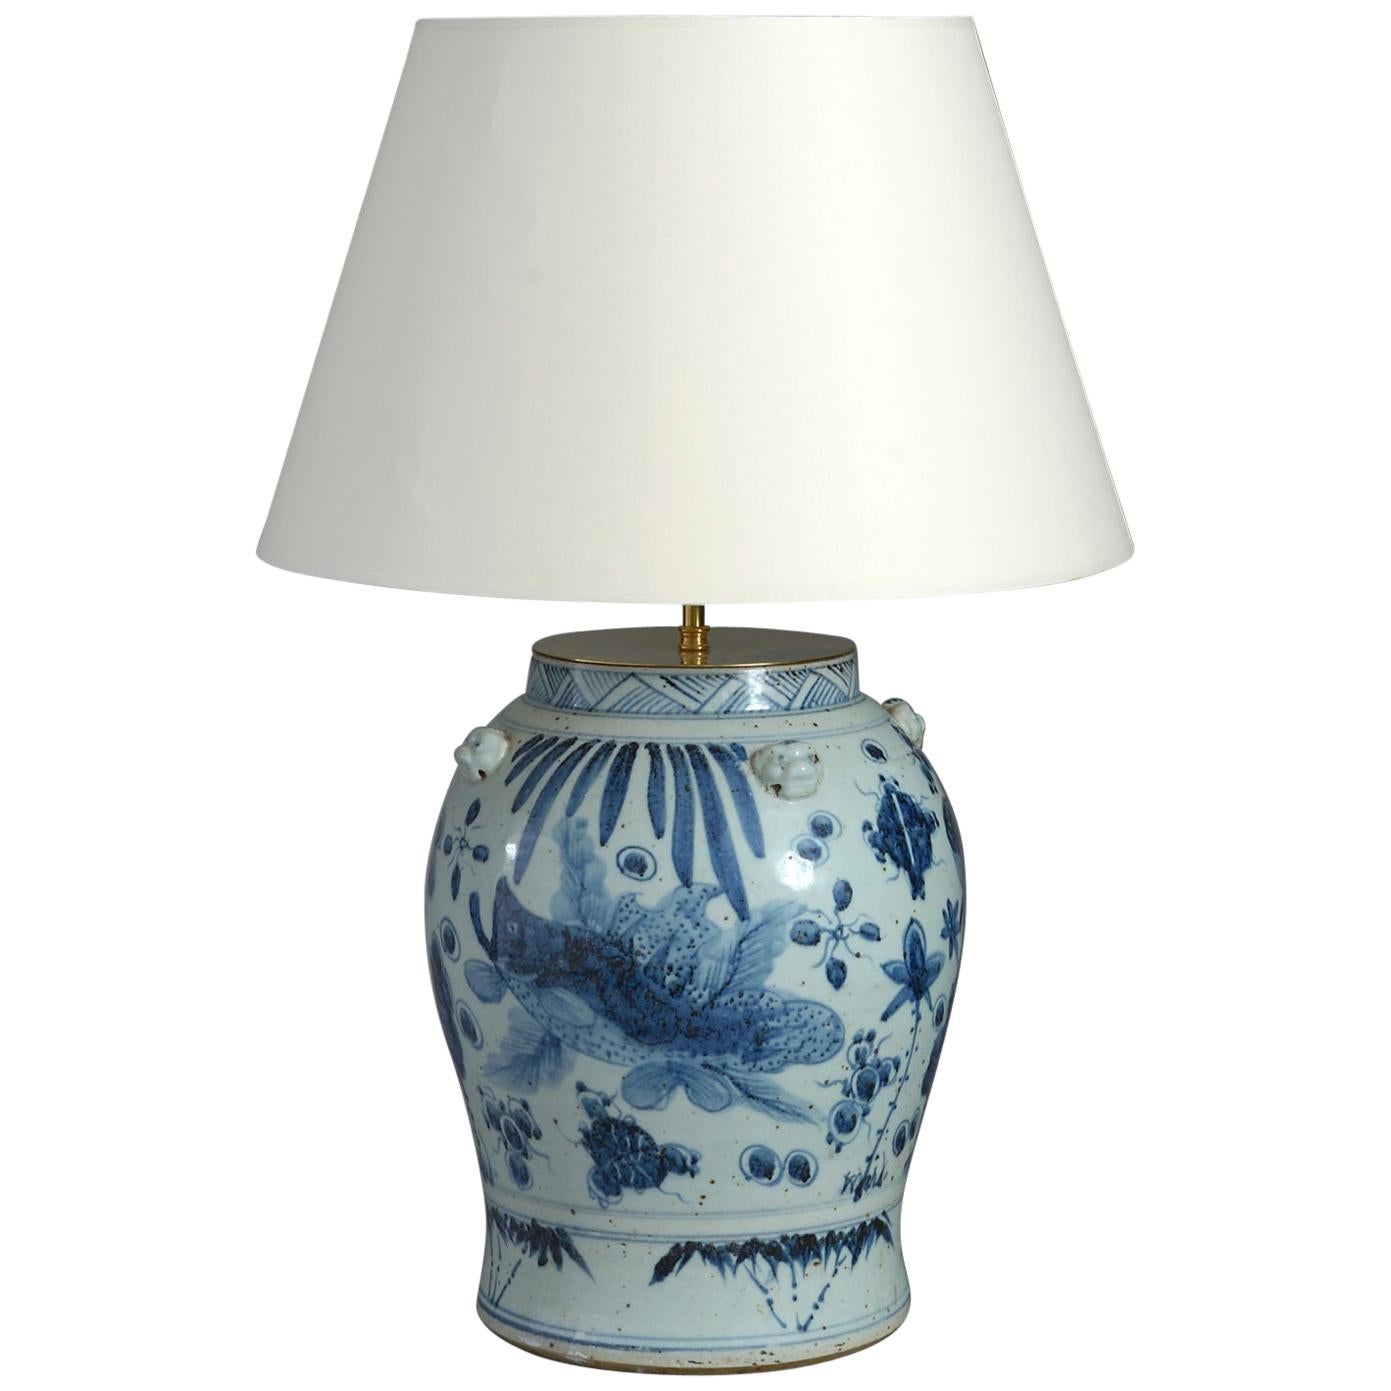 Blue and White Porcelain Vase Lamp Decorated with Fish and Seaweed